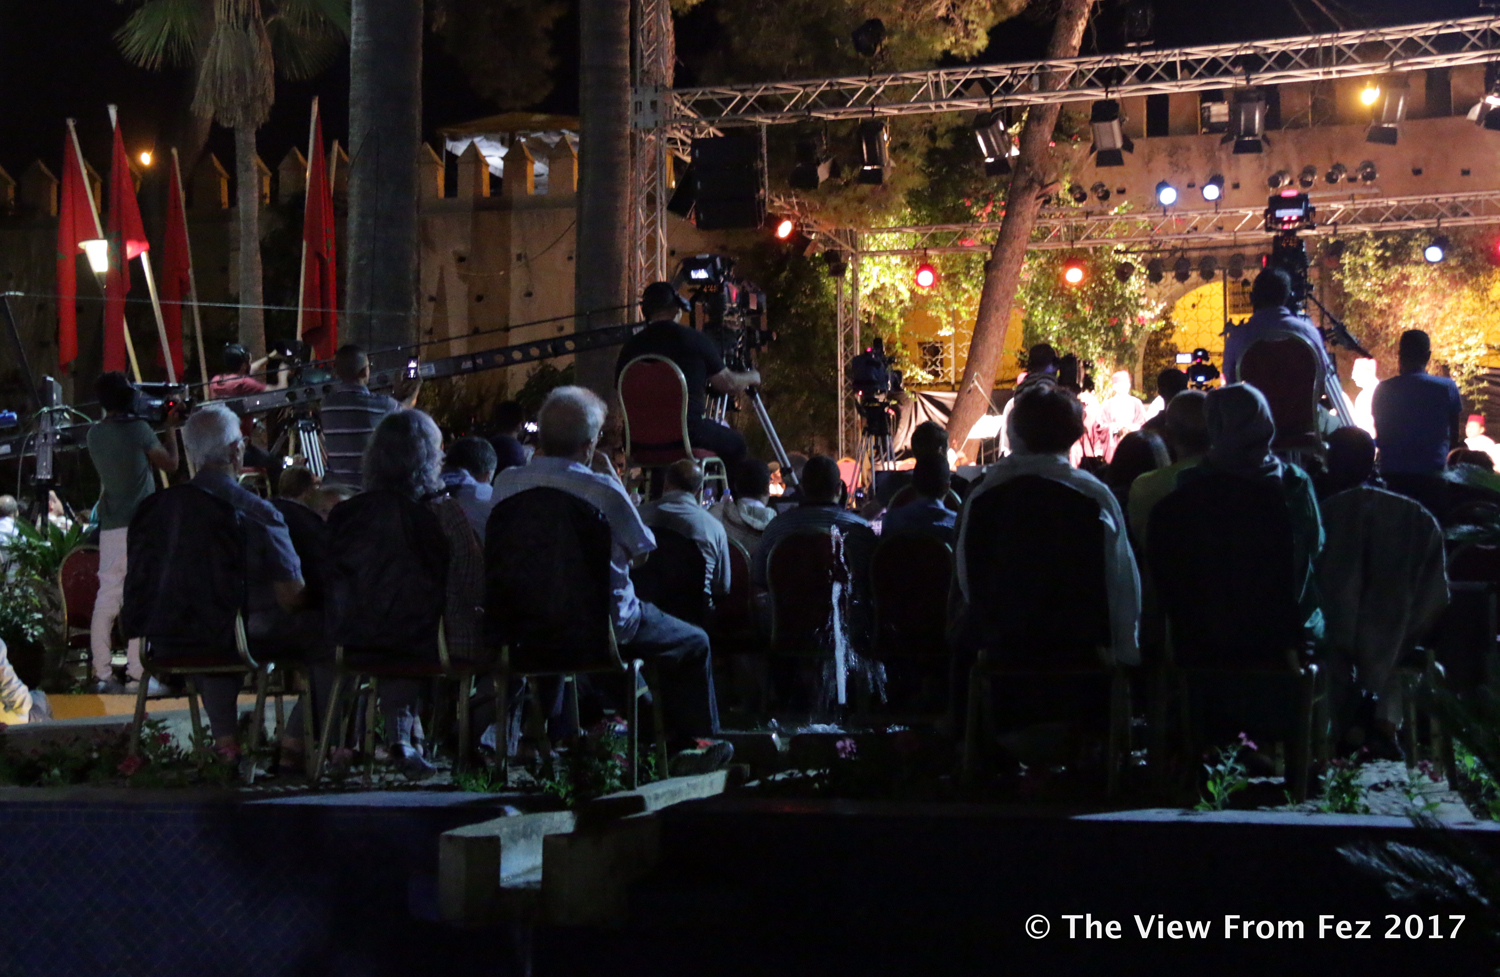 THE VIEW FROM FEZ: Fez Festival of Sufi Culture - Day One Review